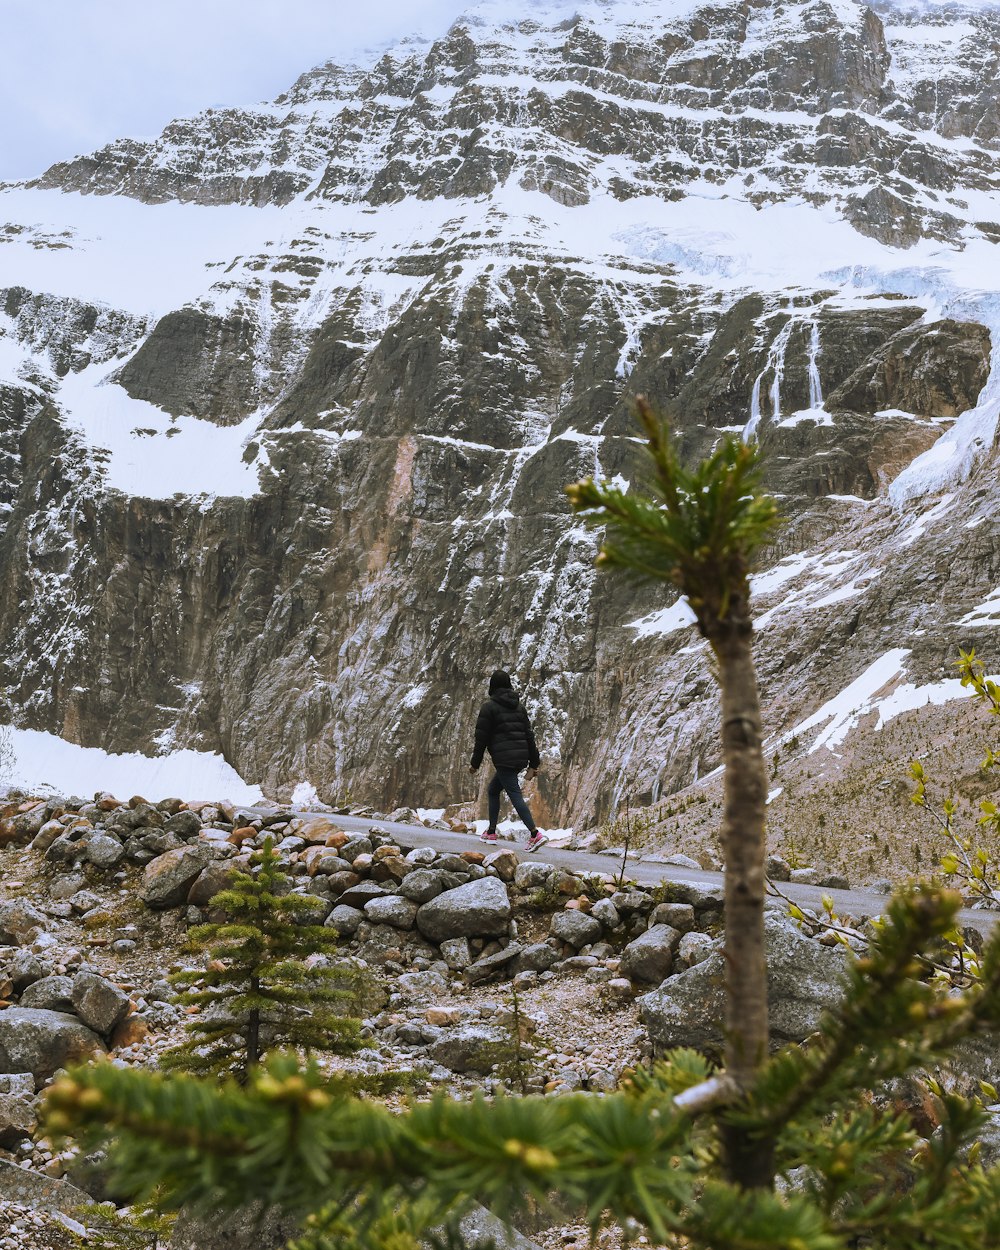 a person walking on a rocky path in front of a snowy mountain